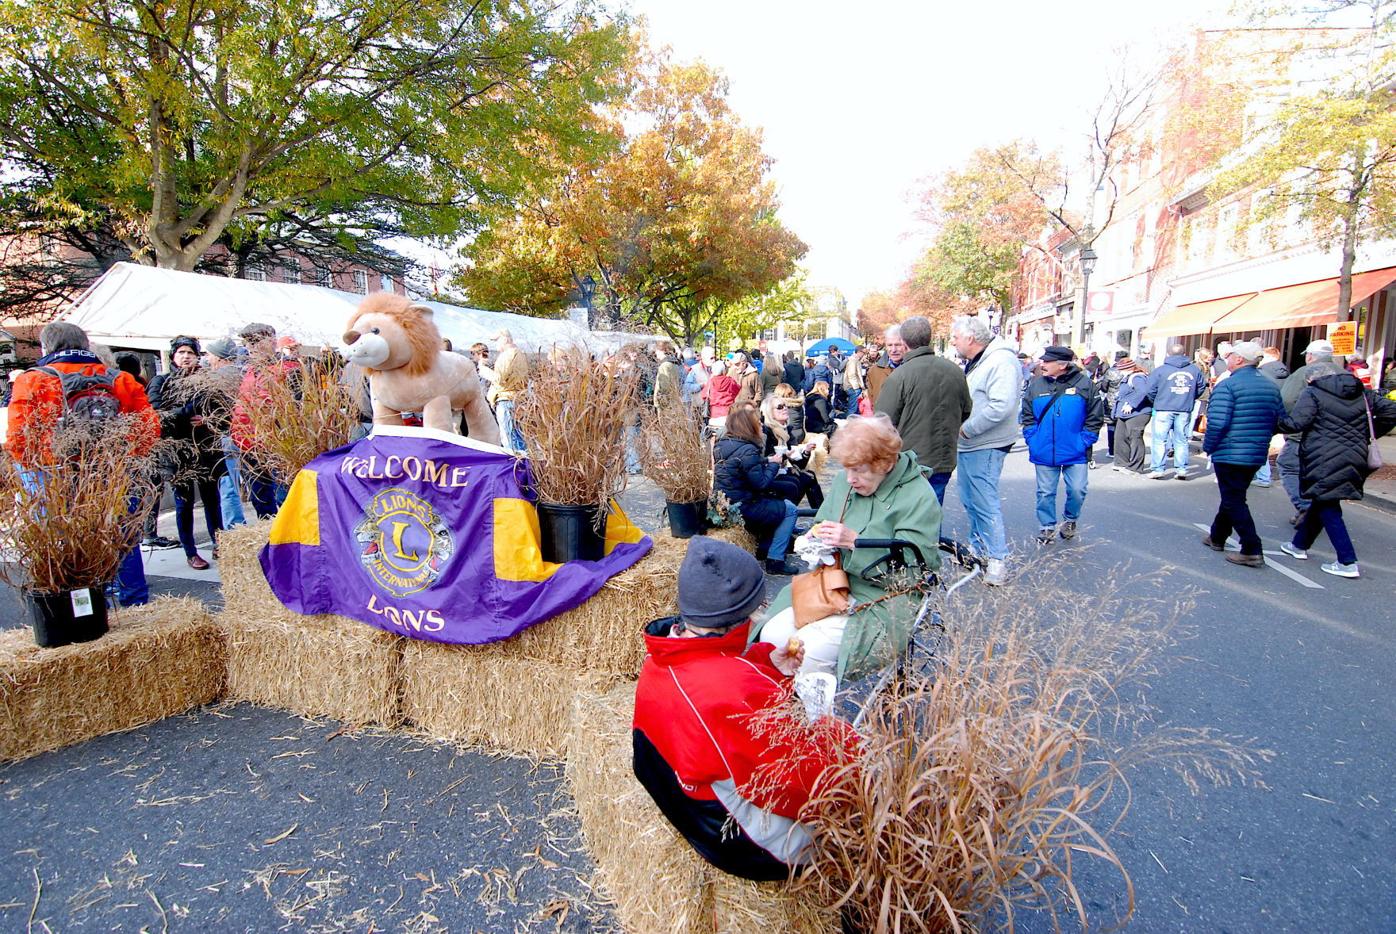 Crowds pack Easton for Waterfowl Festival Local